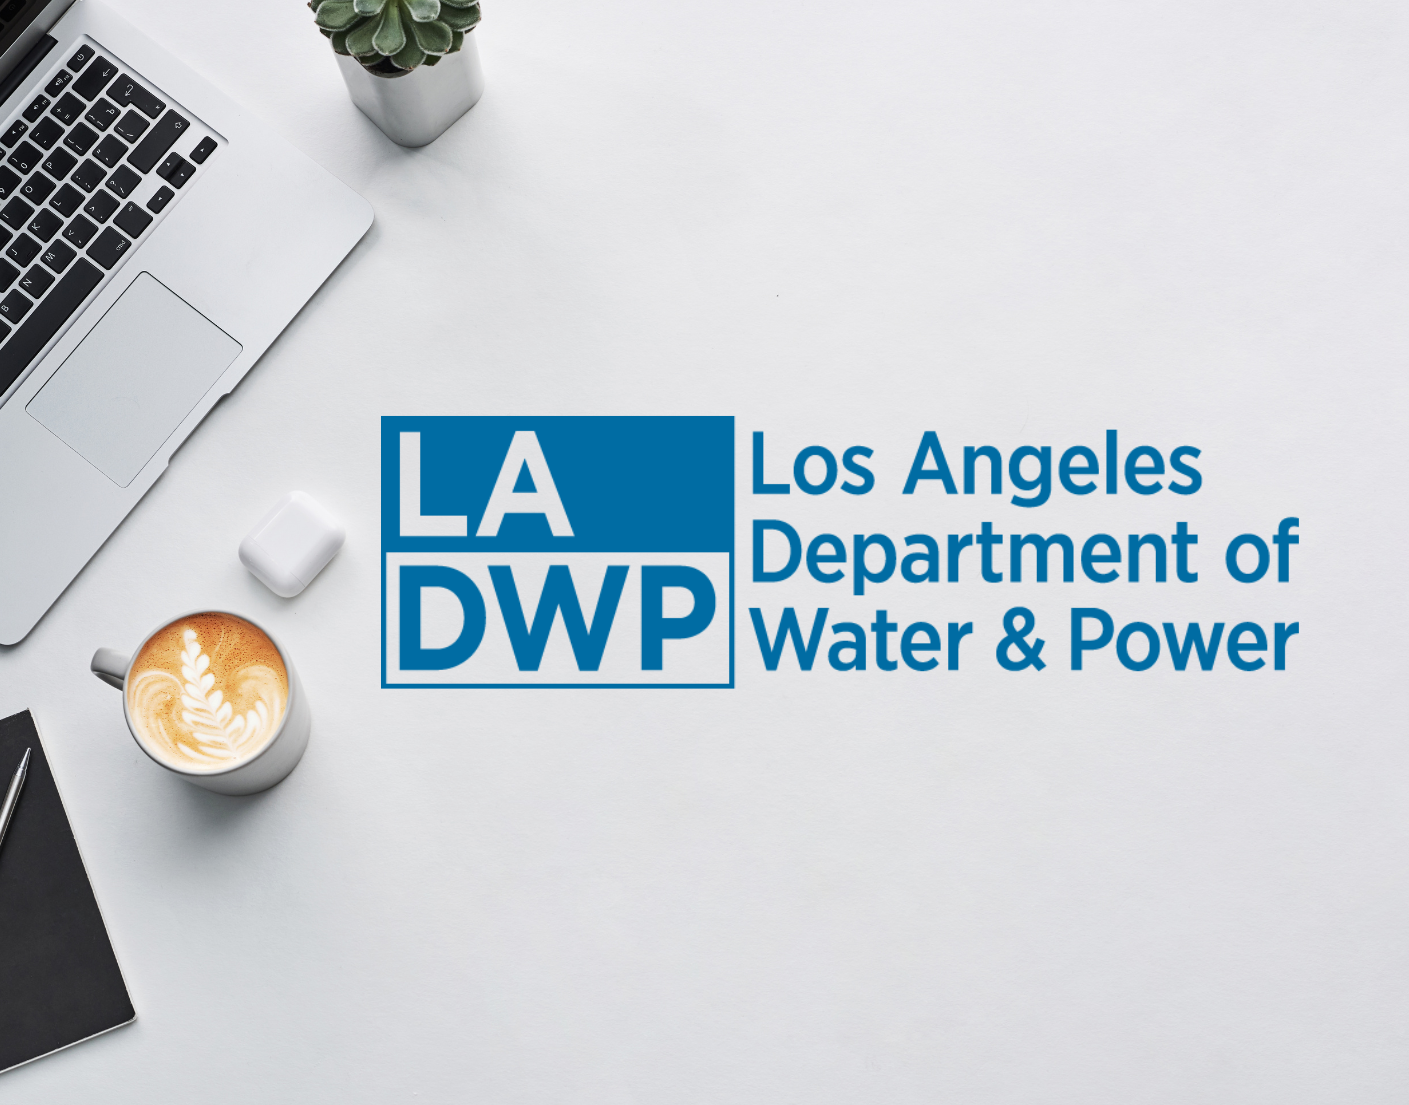 “LADWP Offers New Direct Discount for Flume, a Smart Home Water Monitoring Device”